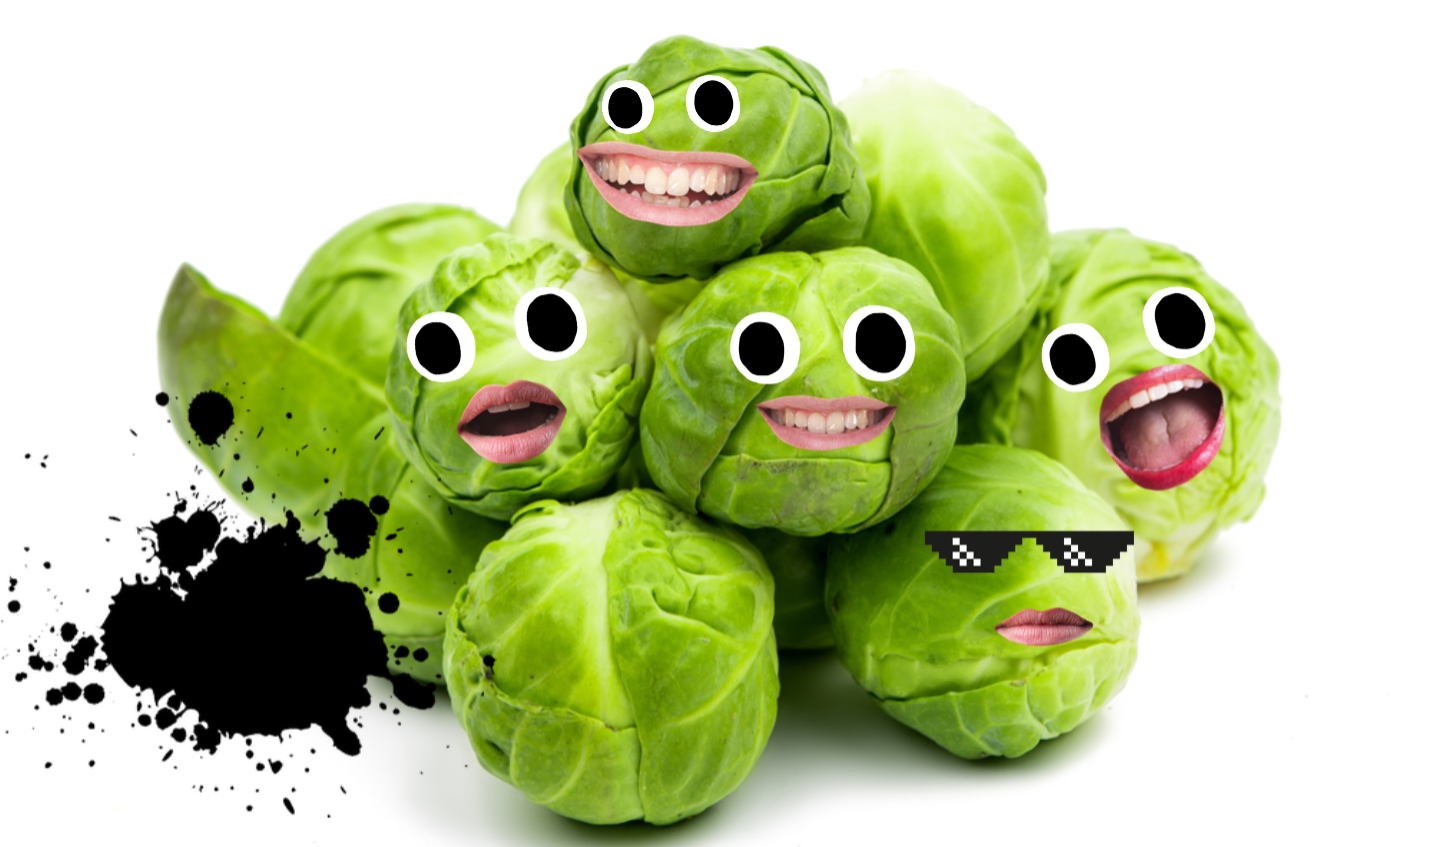 Smiling brussels sprouts